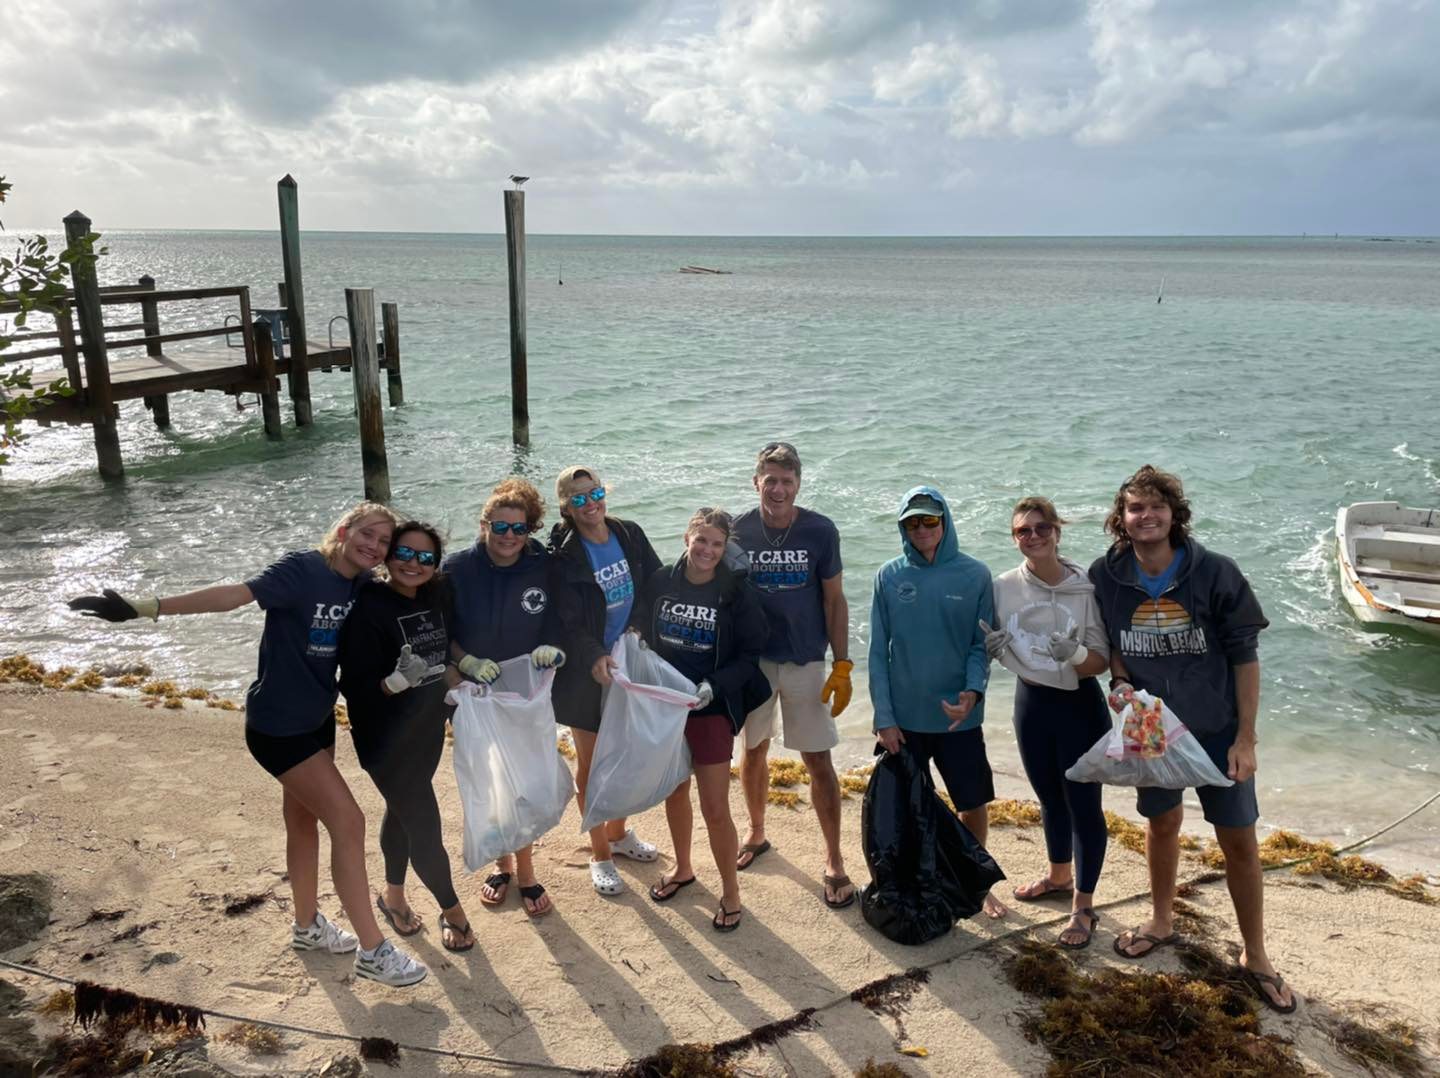 A group of divers and ocean adovcates clean up a shoreline in the Florida Keys. They're holding bags of trash.